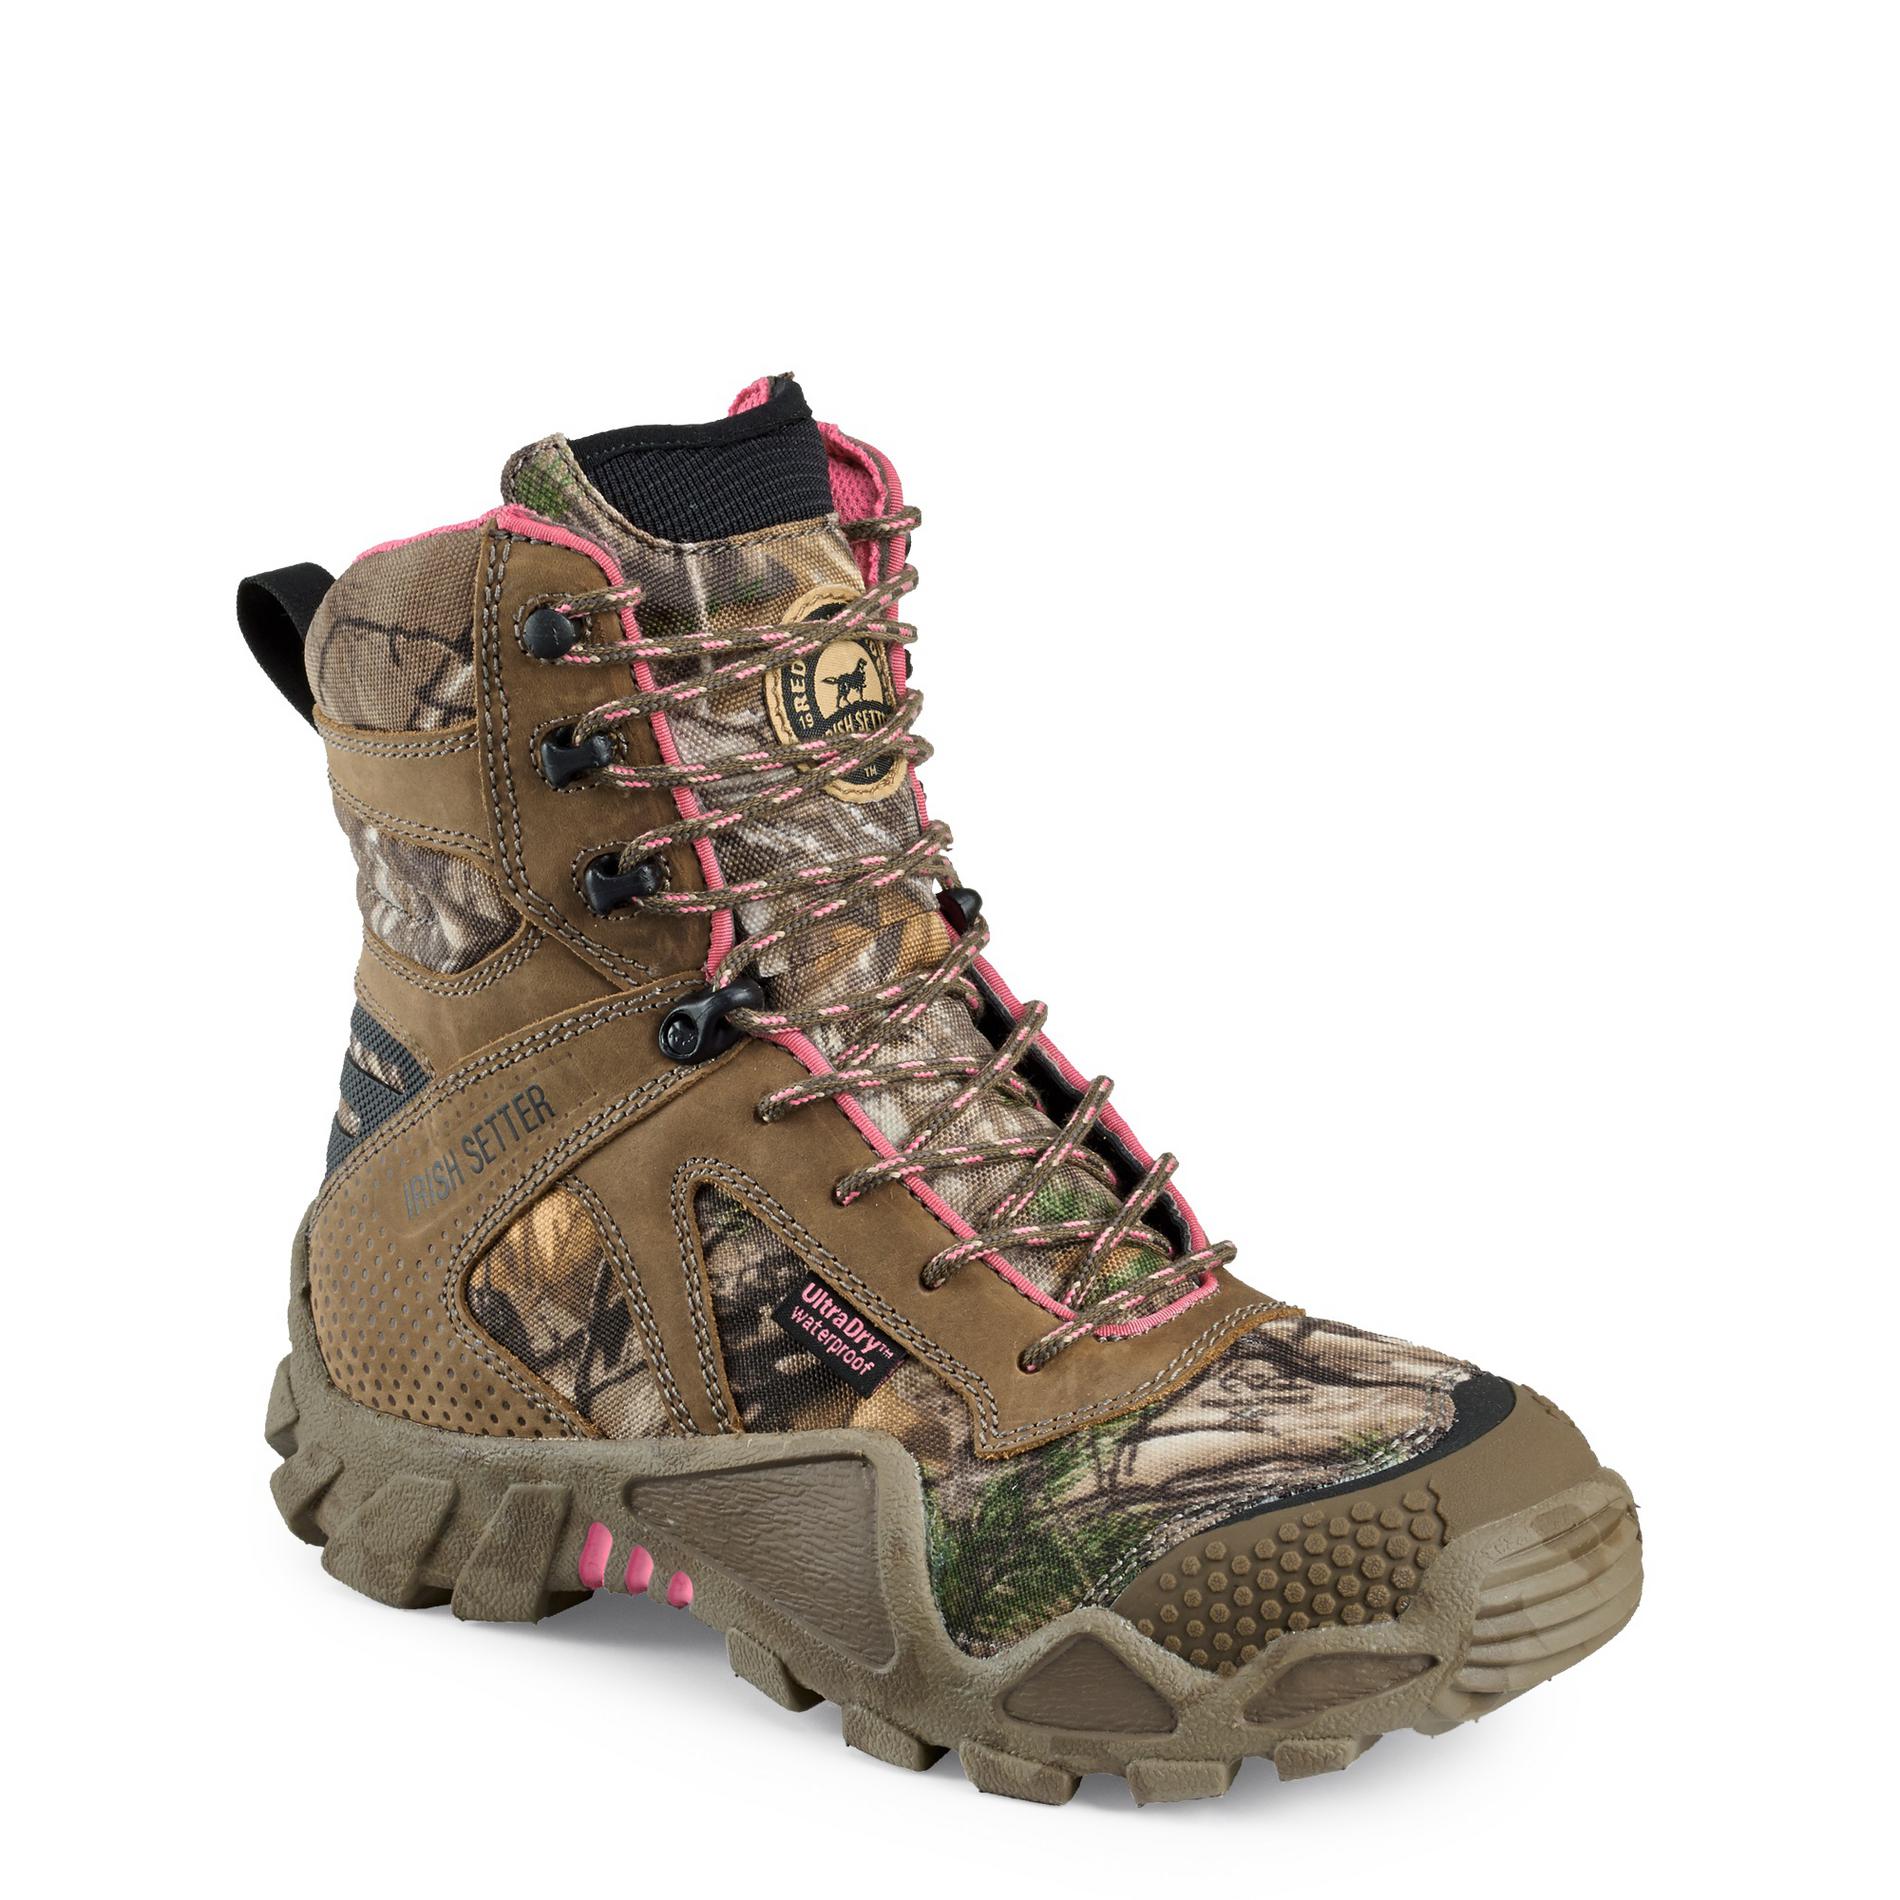 Irish Setter Boots by Red Wing Shoes Women's Vaprtrek Brown Waterproof Hunting Boot